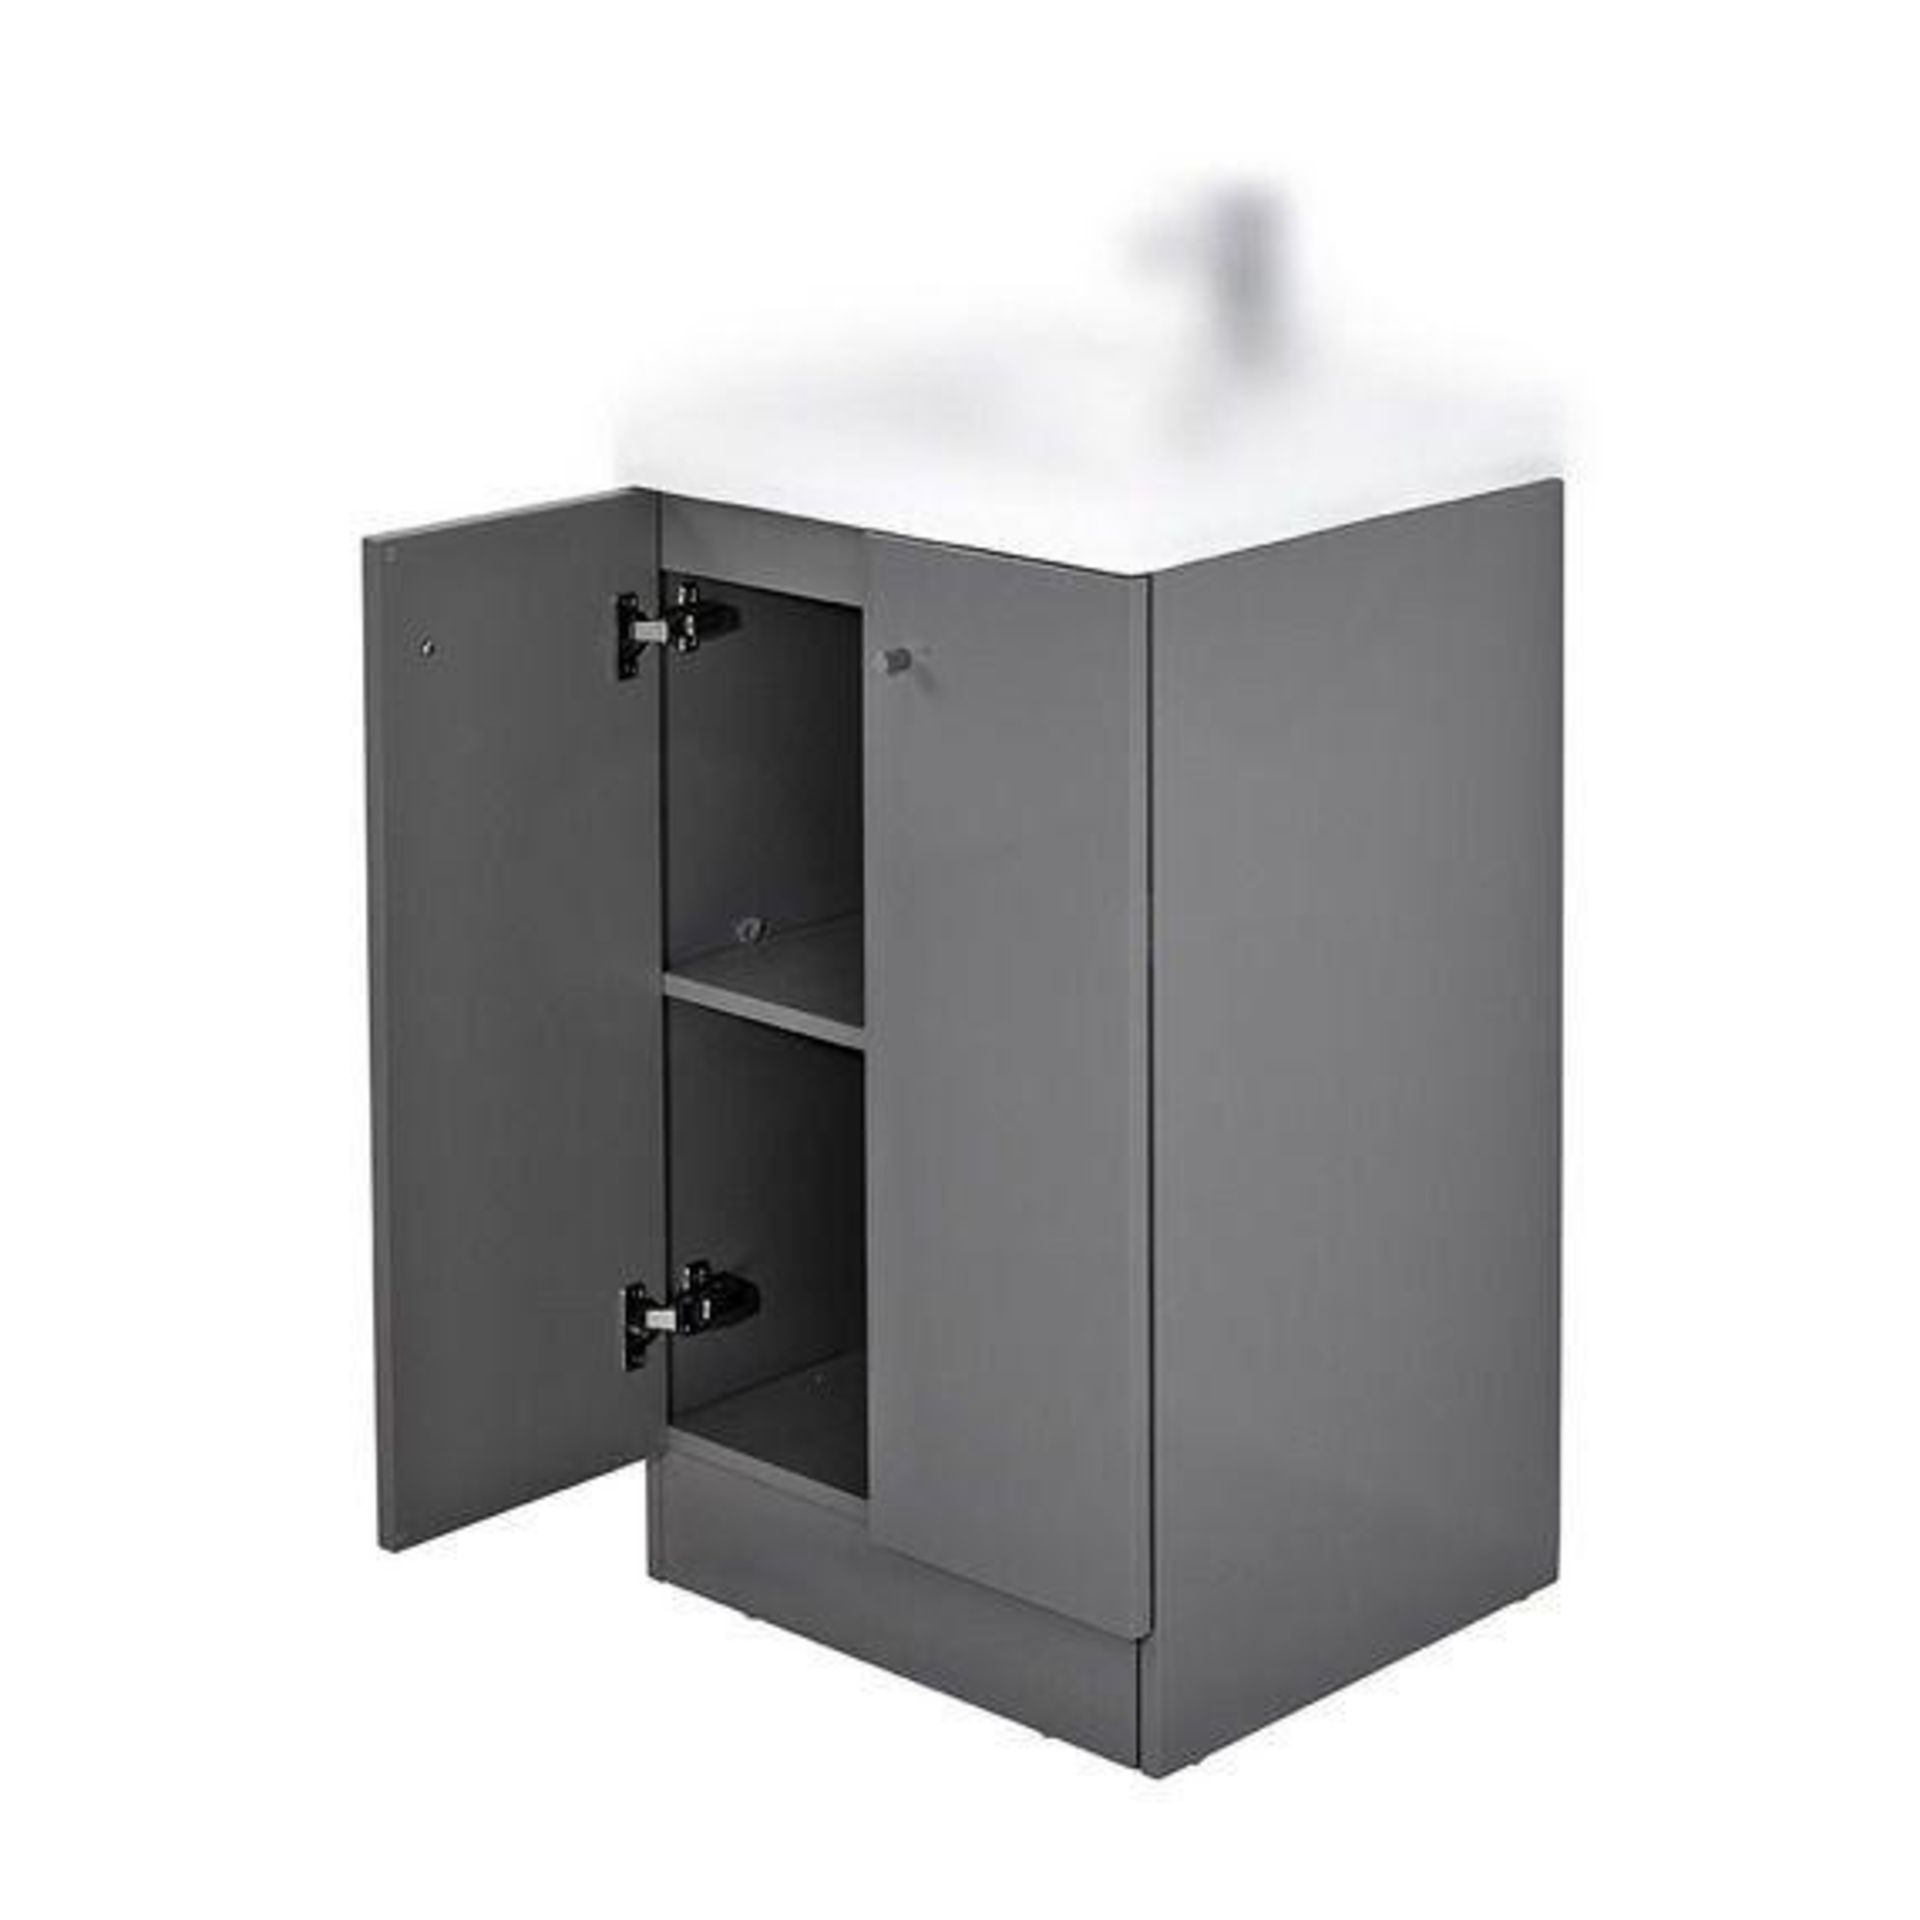 10 x Alpine Duo 500 Floor Standing Vanity Unit - Ultra-Modern Square Design With Soft Close Doors an - Image 5 of 5